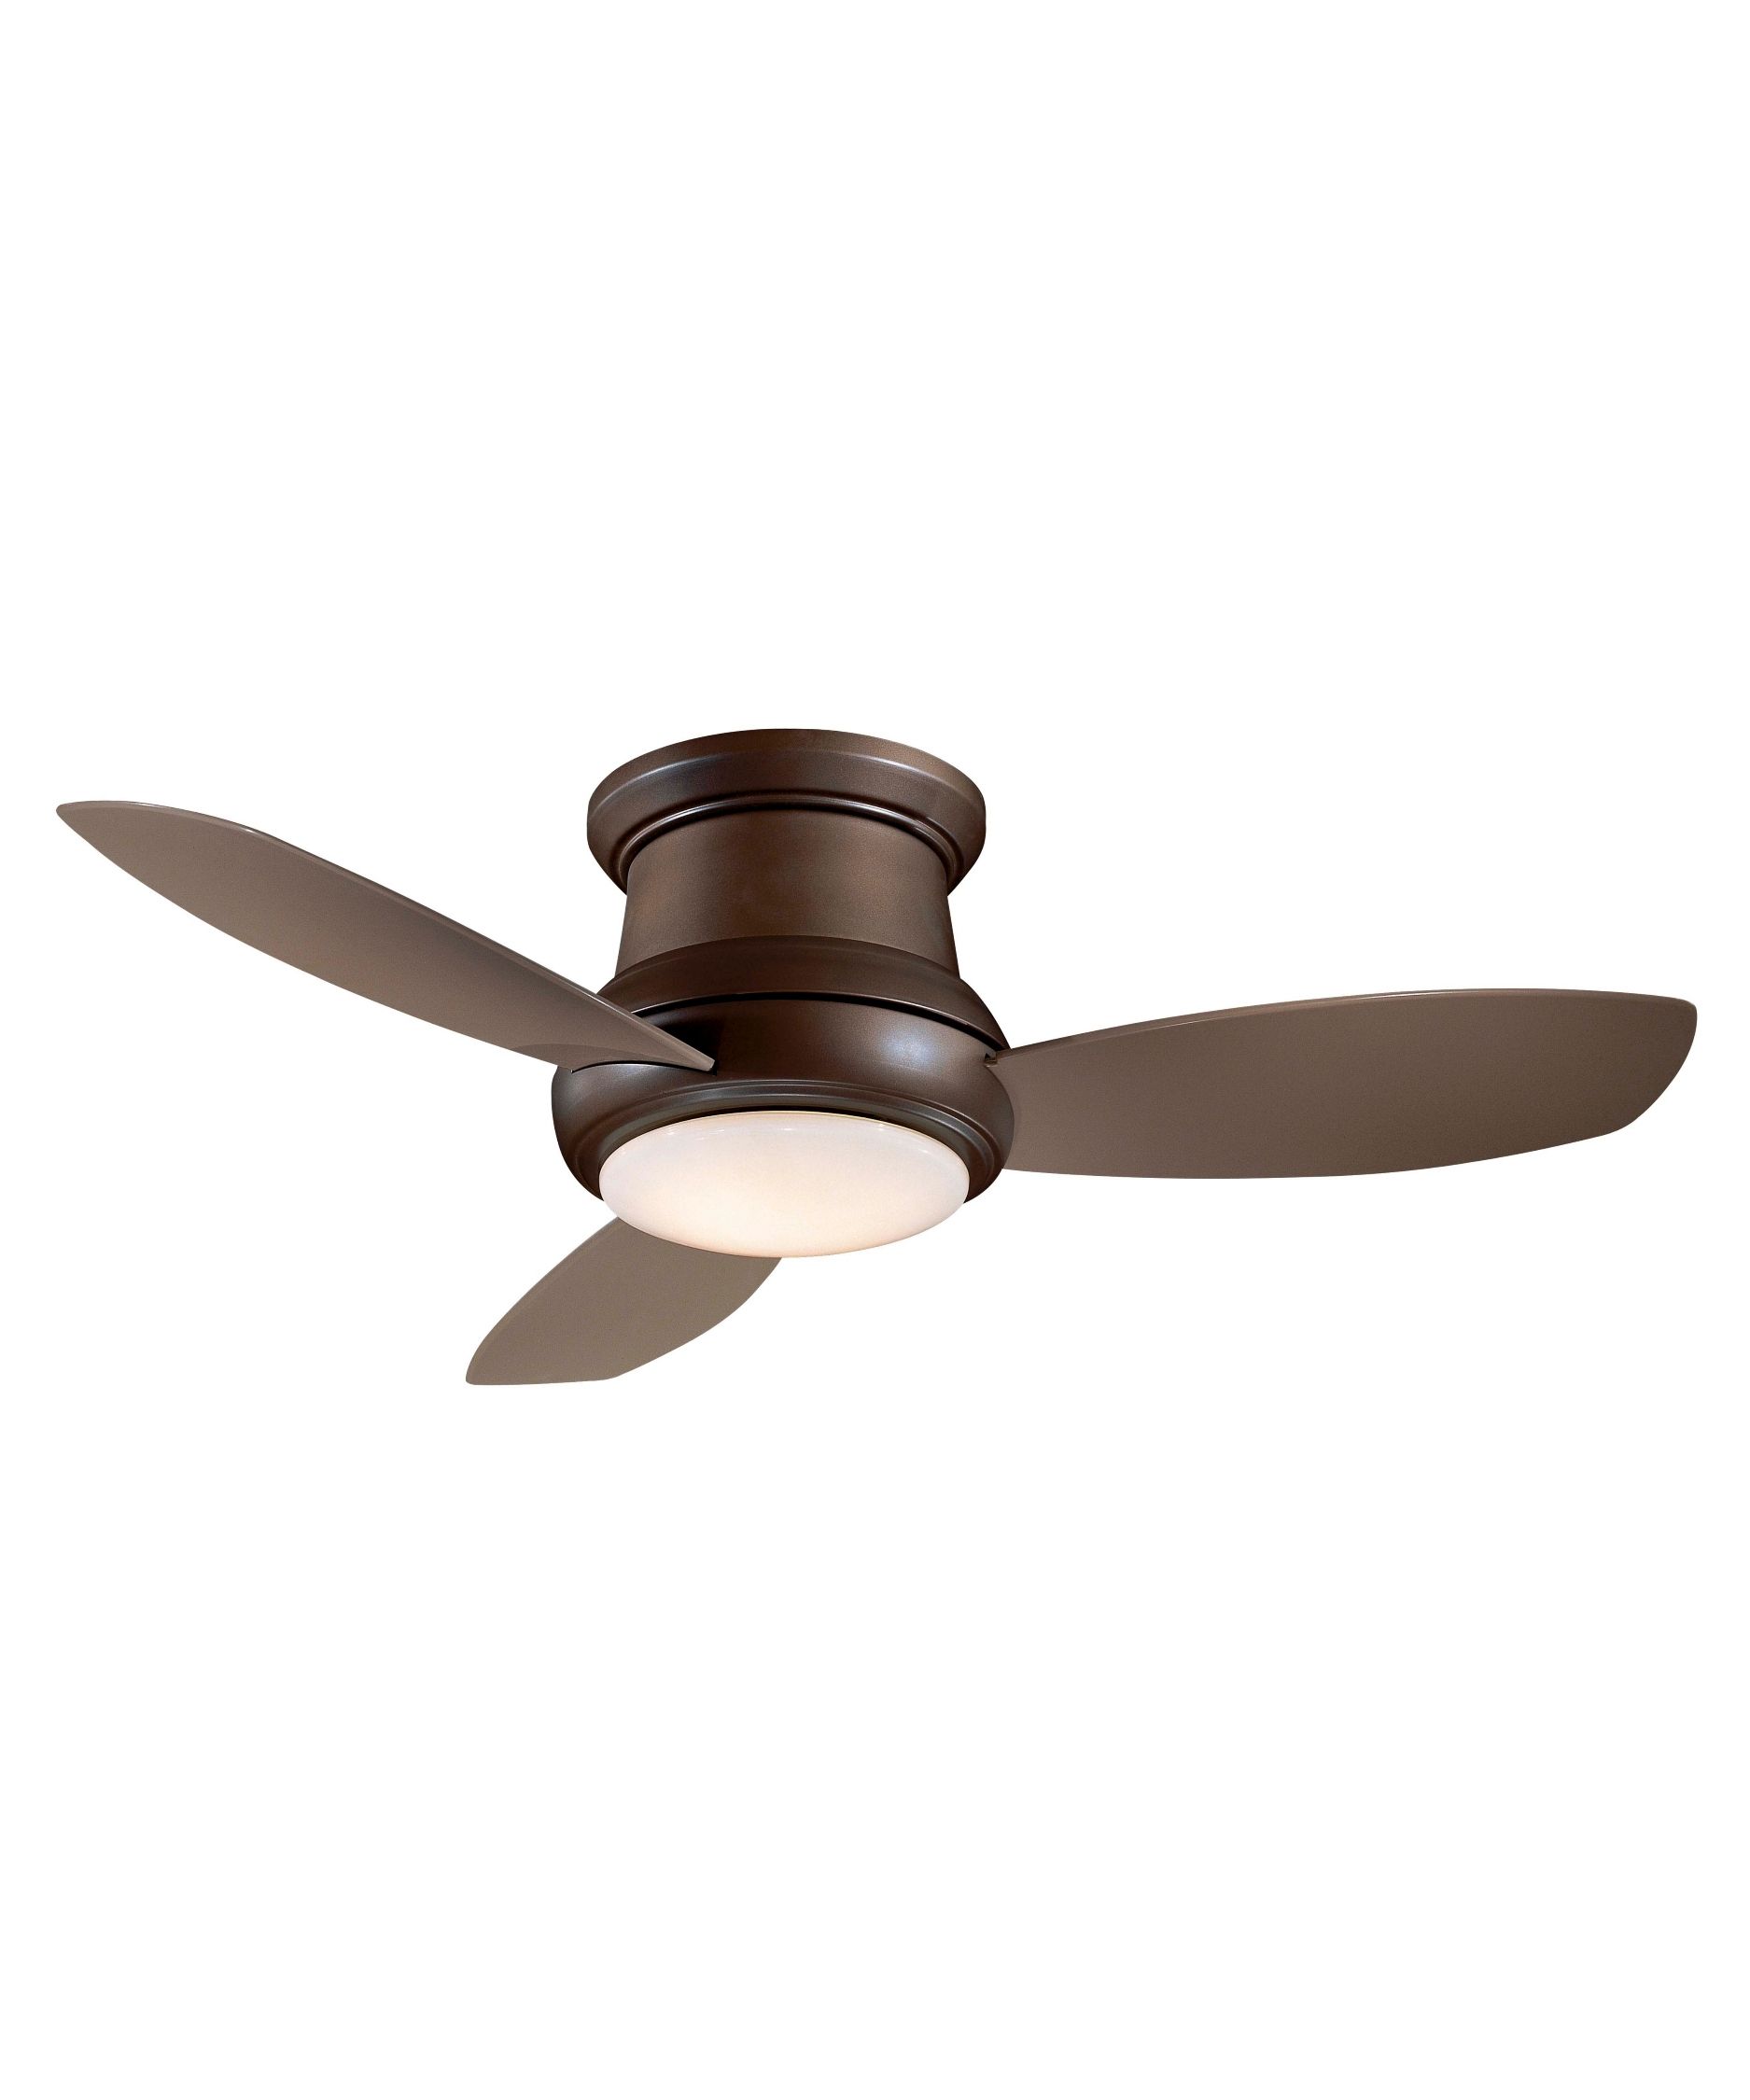 Widely Used Brown Outdoor Ceiling Fan With Light Regarding Outdoor Ceiling Fans With Light – Pixball (View 20 of 20)